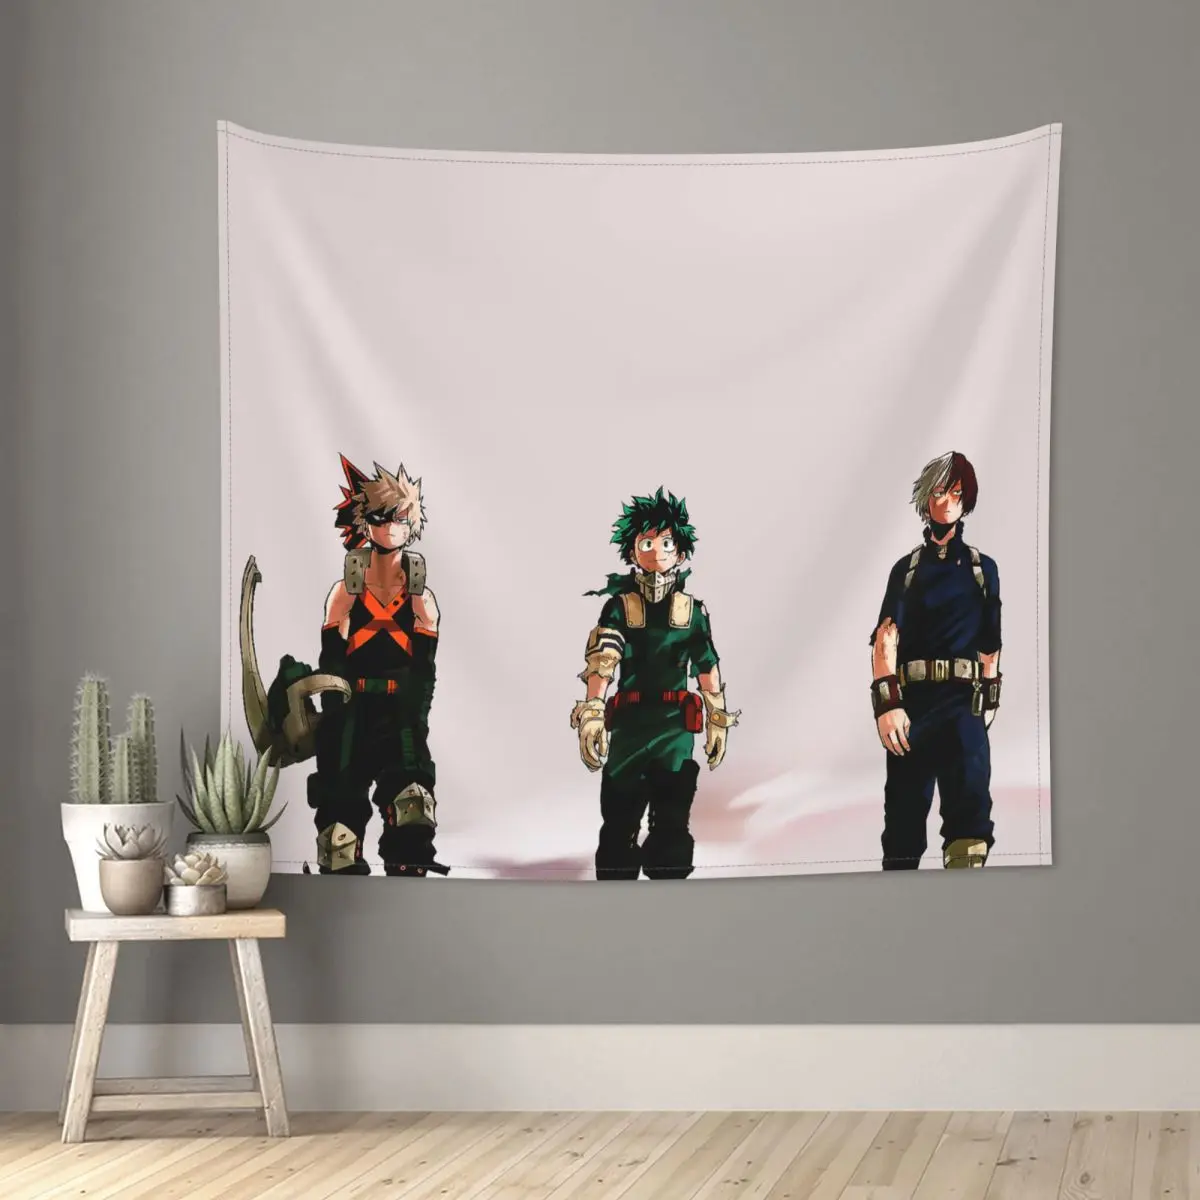 

My Hero Academia Tapestry Wall Hanging Hippie Tapestry Anime Boku No Hero Academia Bohemian Throw Rug Blanket Wall Decor